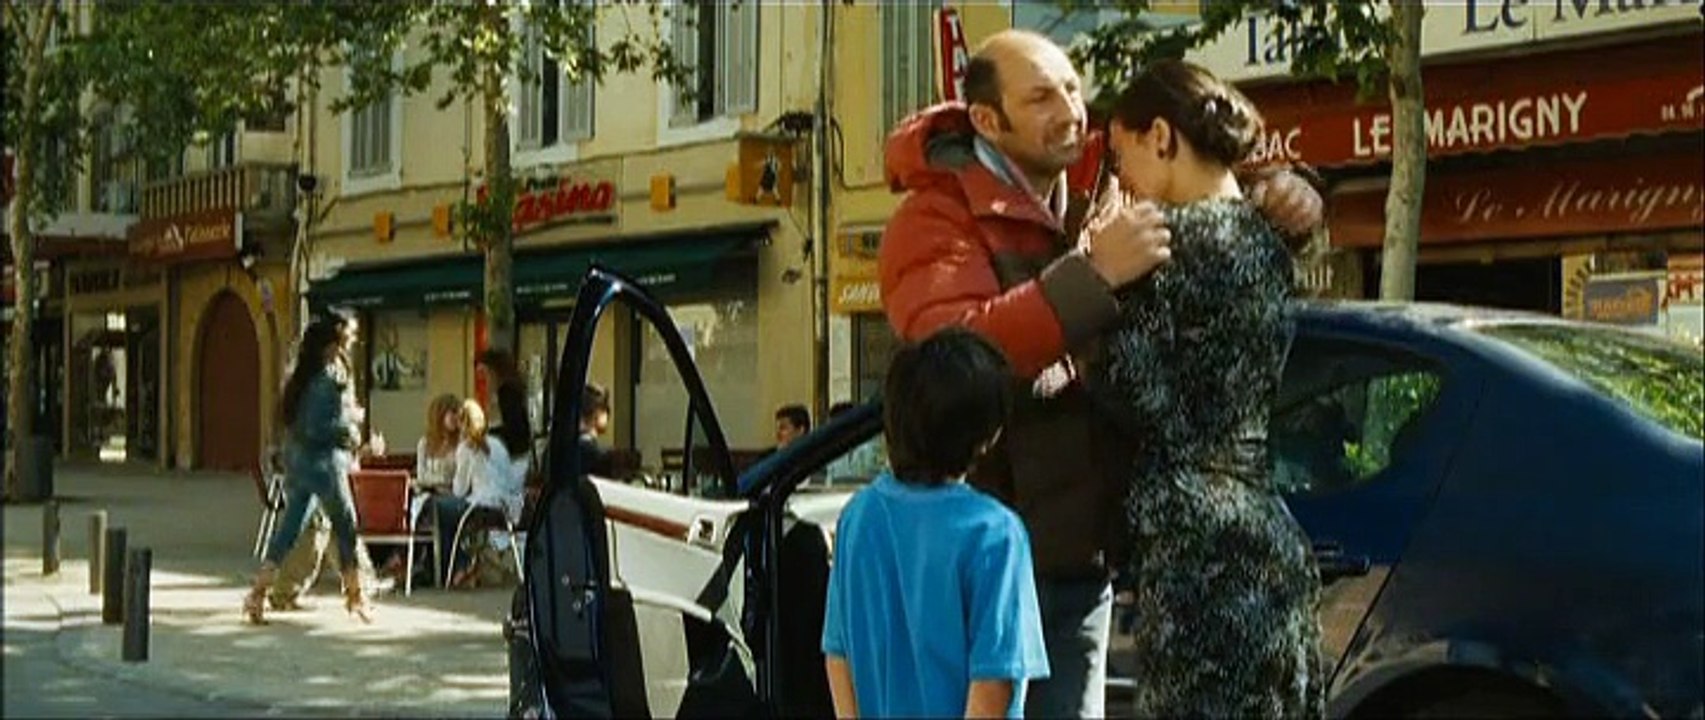 Welcome to the Land of Ch'tis / Bienvenue chez les Ch'tis (2008) - French  trailer - VidÃ©o Dailymotion